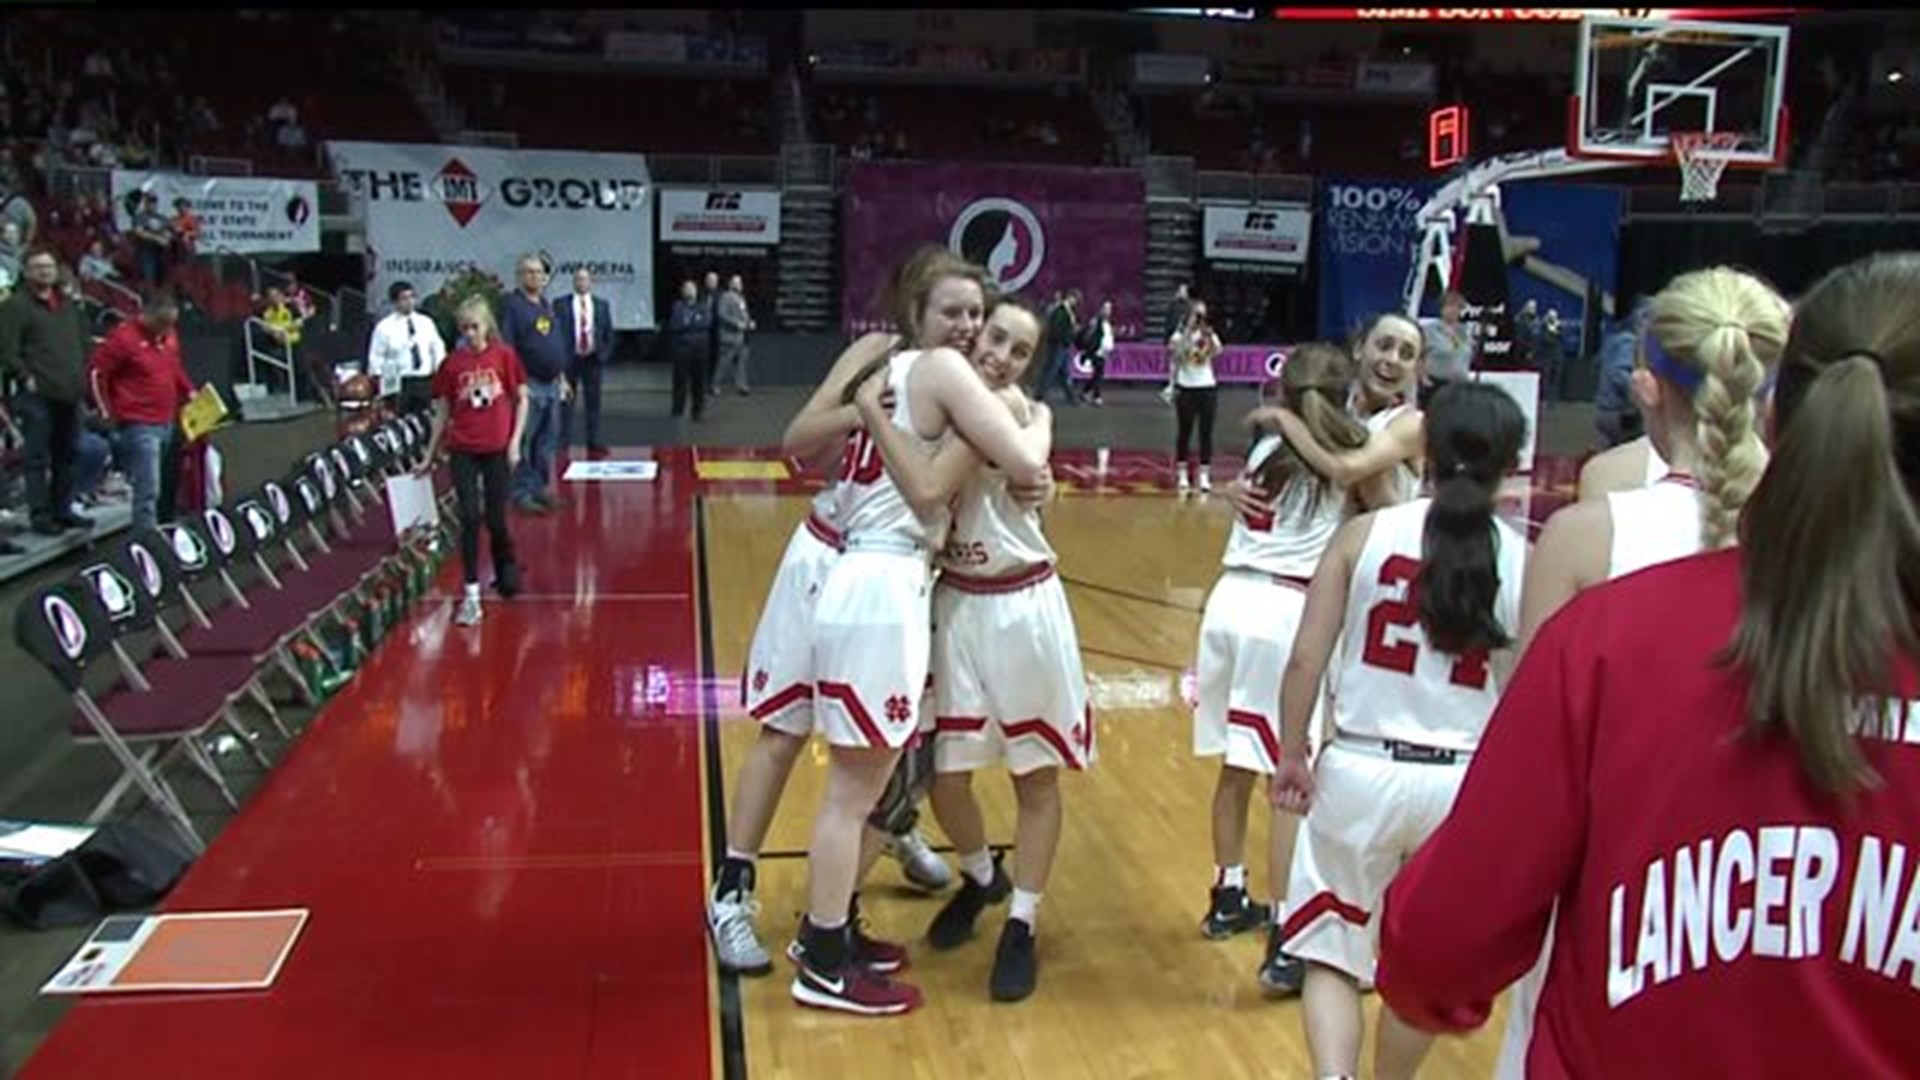 Lady Lancers win State Title in Overtime against Marion